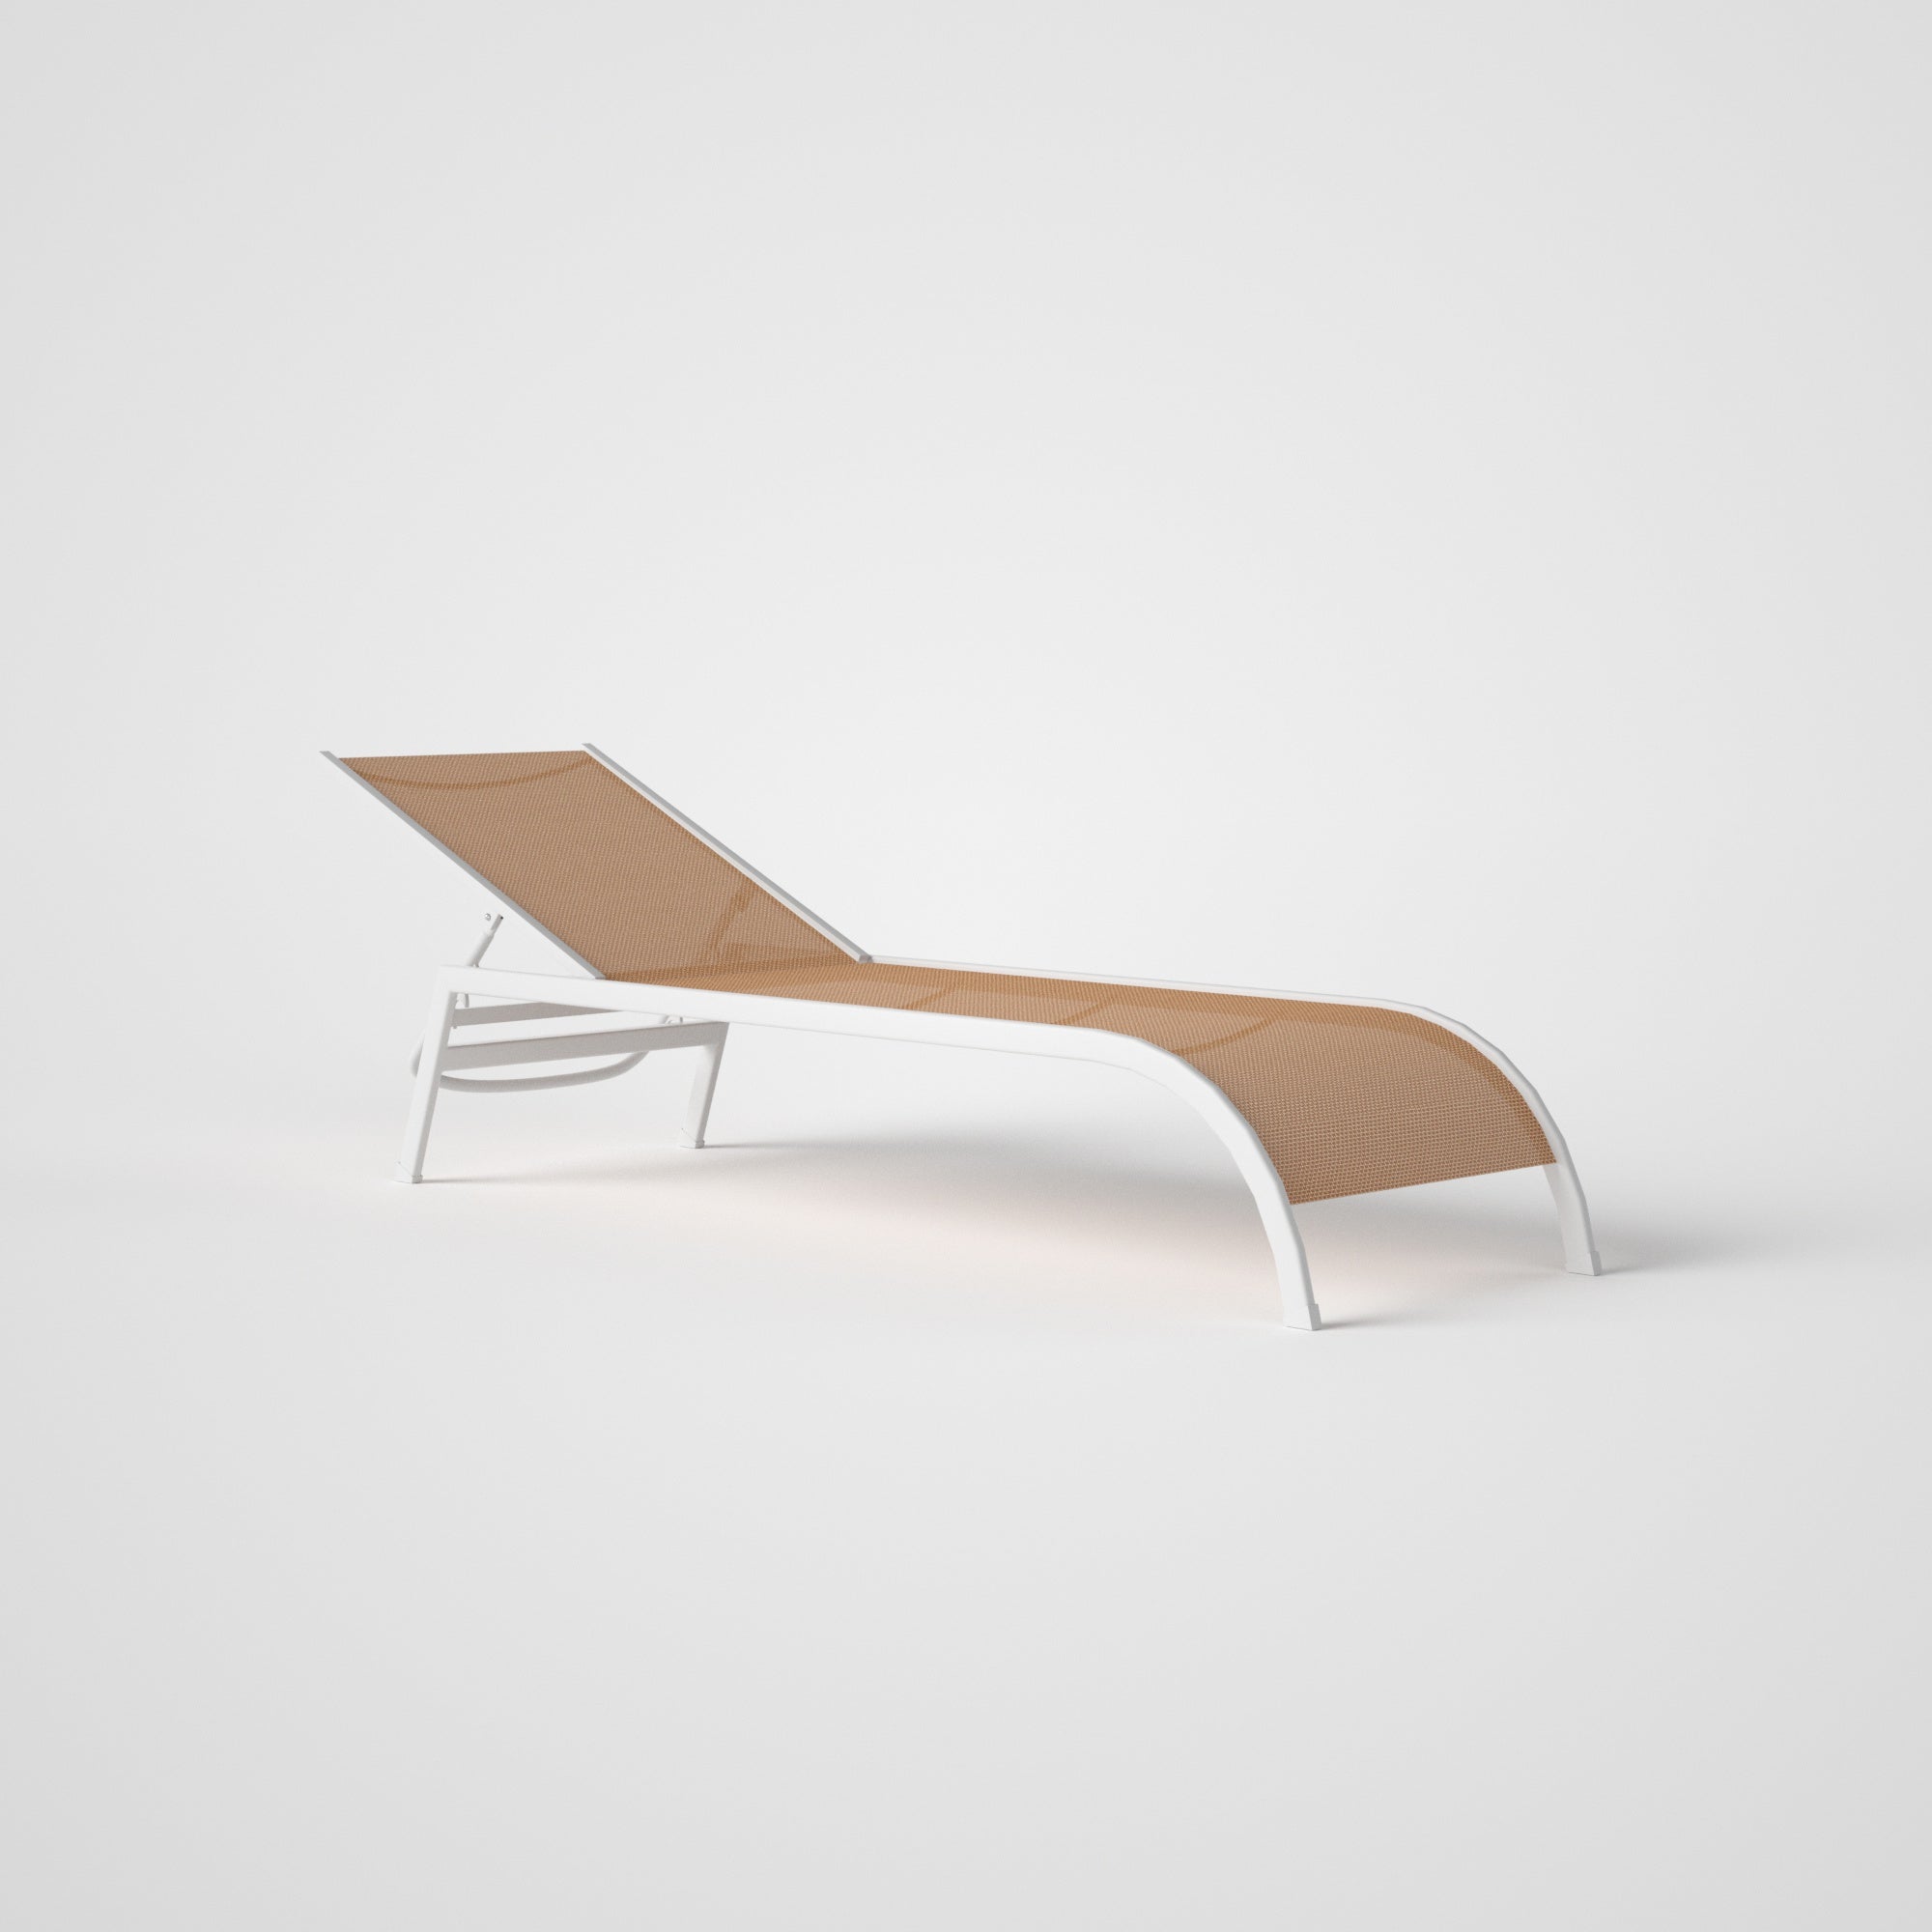 Cruiseline Sun lounger without arms